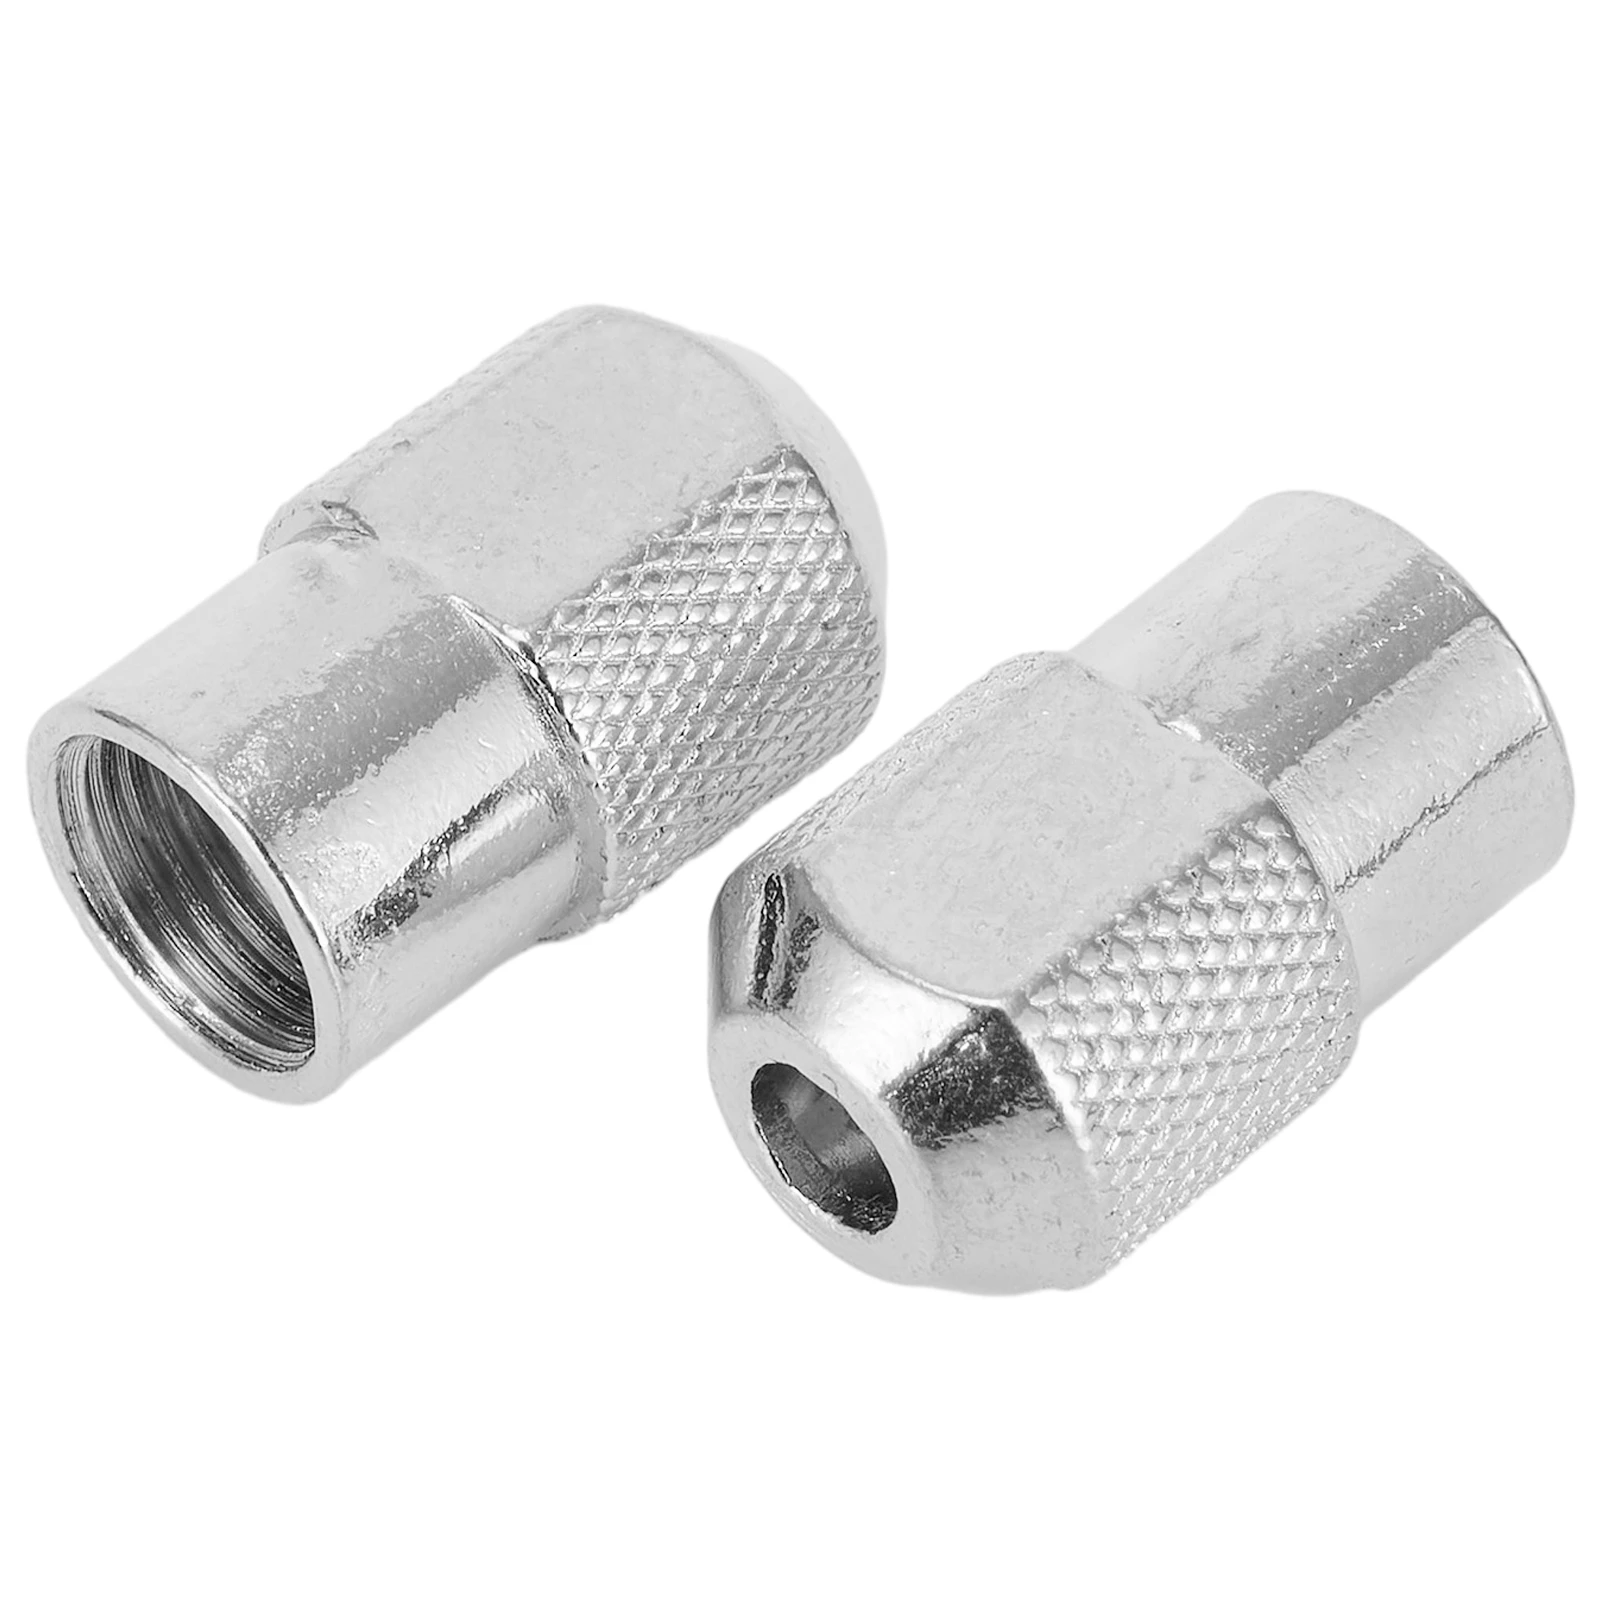 5pcs M8X0.75mm Drill Chuck Electric Mill Shaft Screw Cap Nut Collet For Electric Mill Grinder Shaft Rotary Tool Power Tools Acce 5pcs m8x0 75mm drill chuck electric mill shaft screw cap nut collet for electric mill grinder shaft rotary tool power tools acce